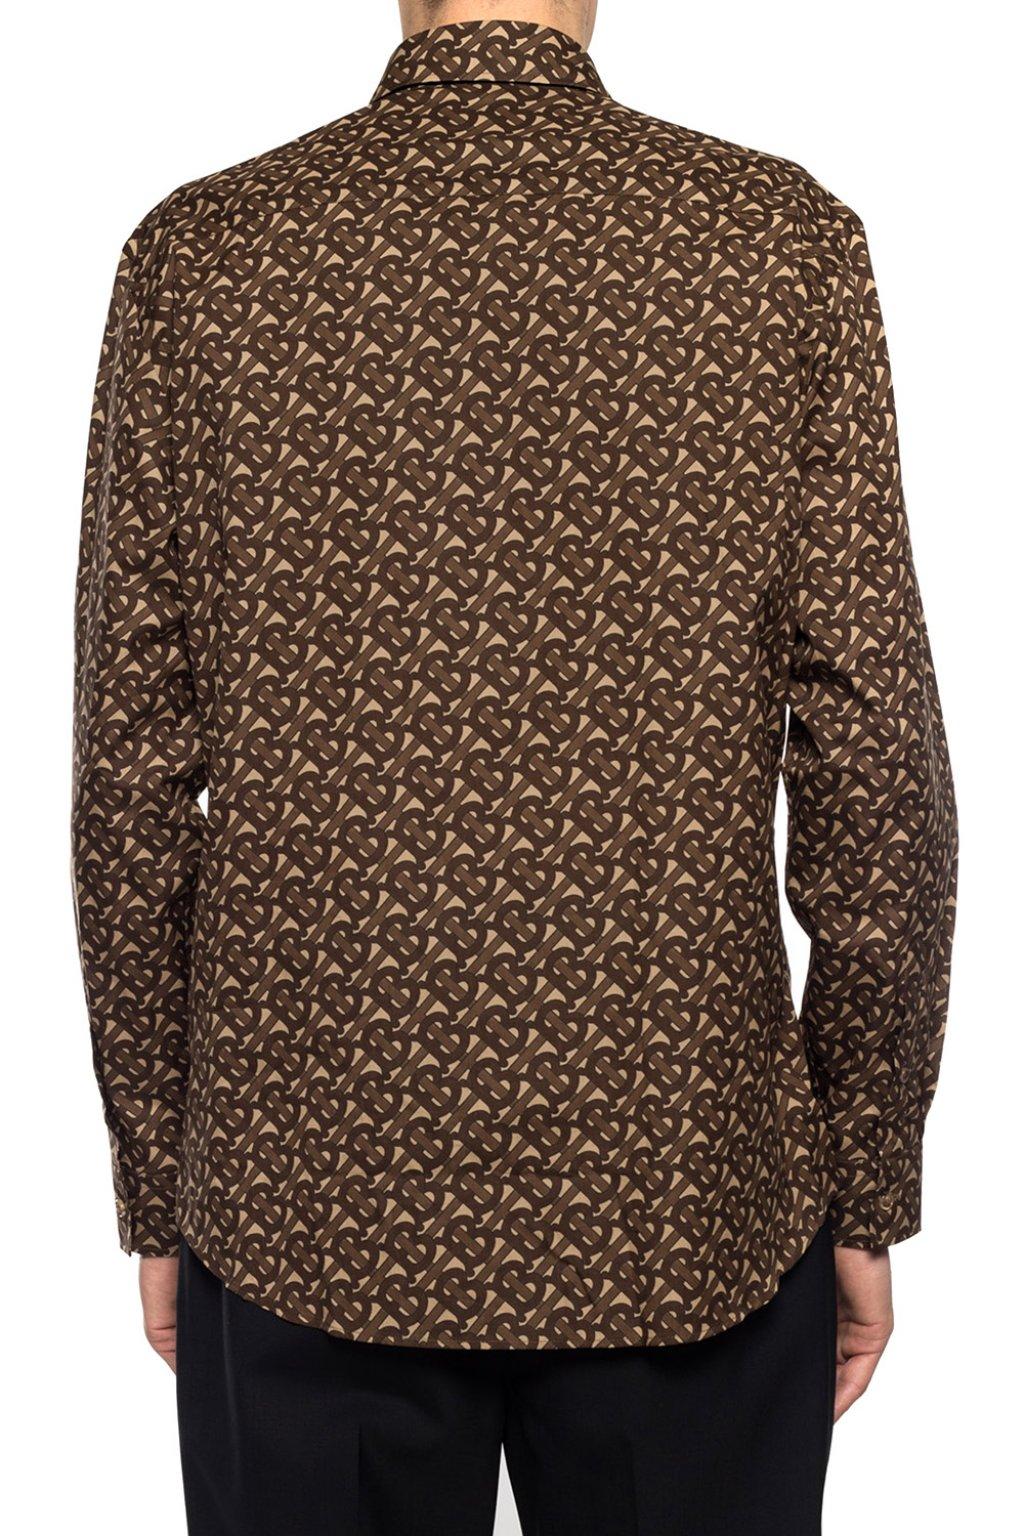 Burberry Cotton Long Sleeve Shirt in Bridle Brown (Brown) for Men 